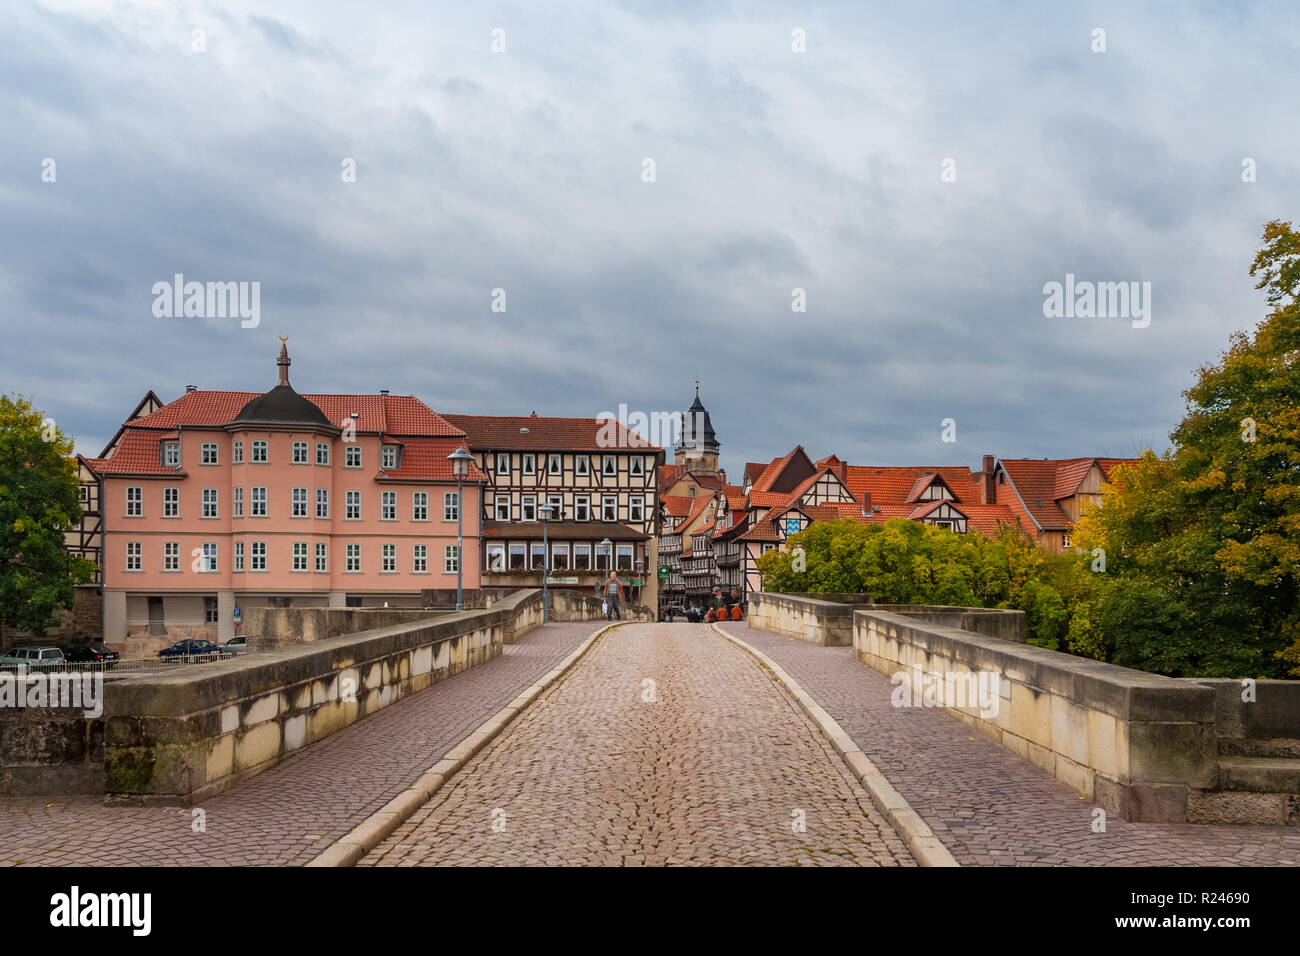 View of the old town of Hann. Münden with its half-timbered houses from the Old Werra Bridge paved with cobblestones. The building on the left is the... Stock Photo